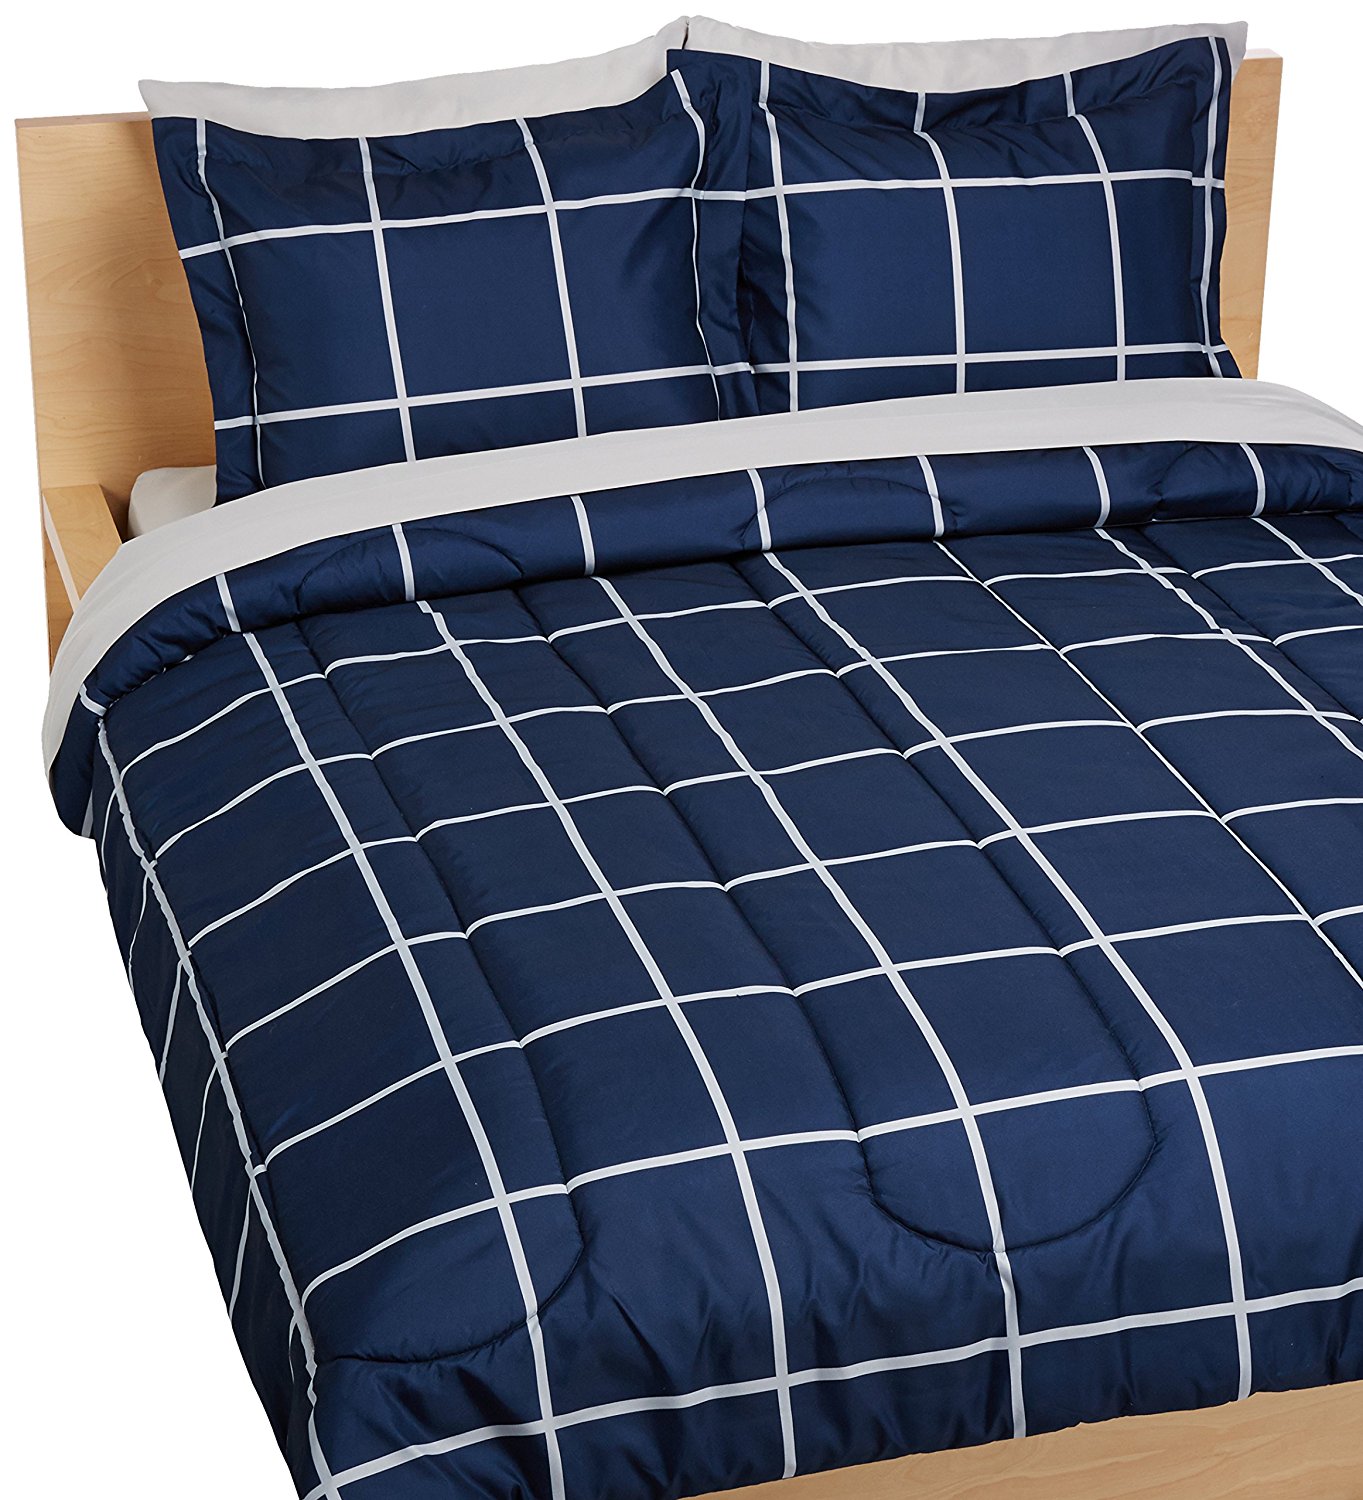 AmazonBasics Bed in a Bag Bedding 7 Piece Bed In A Bag